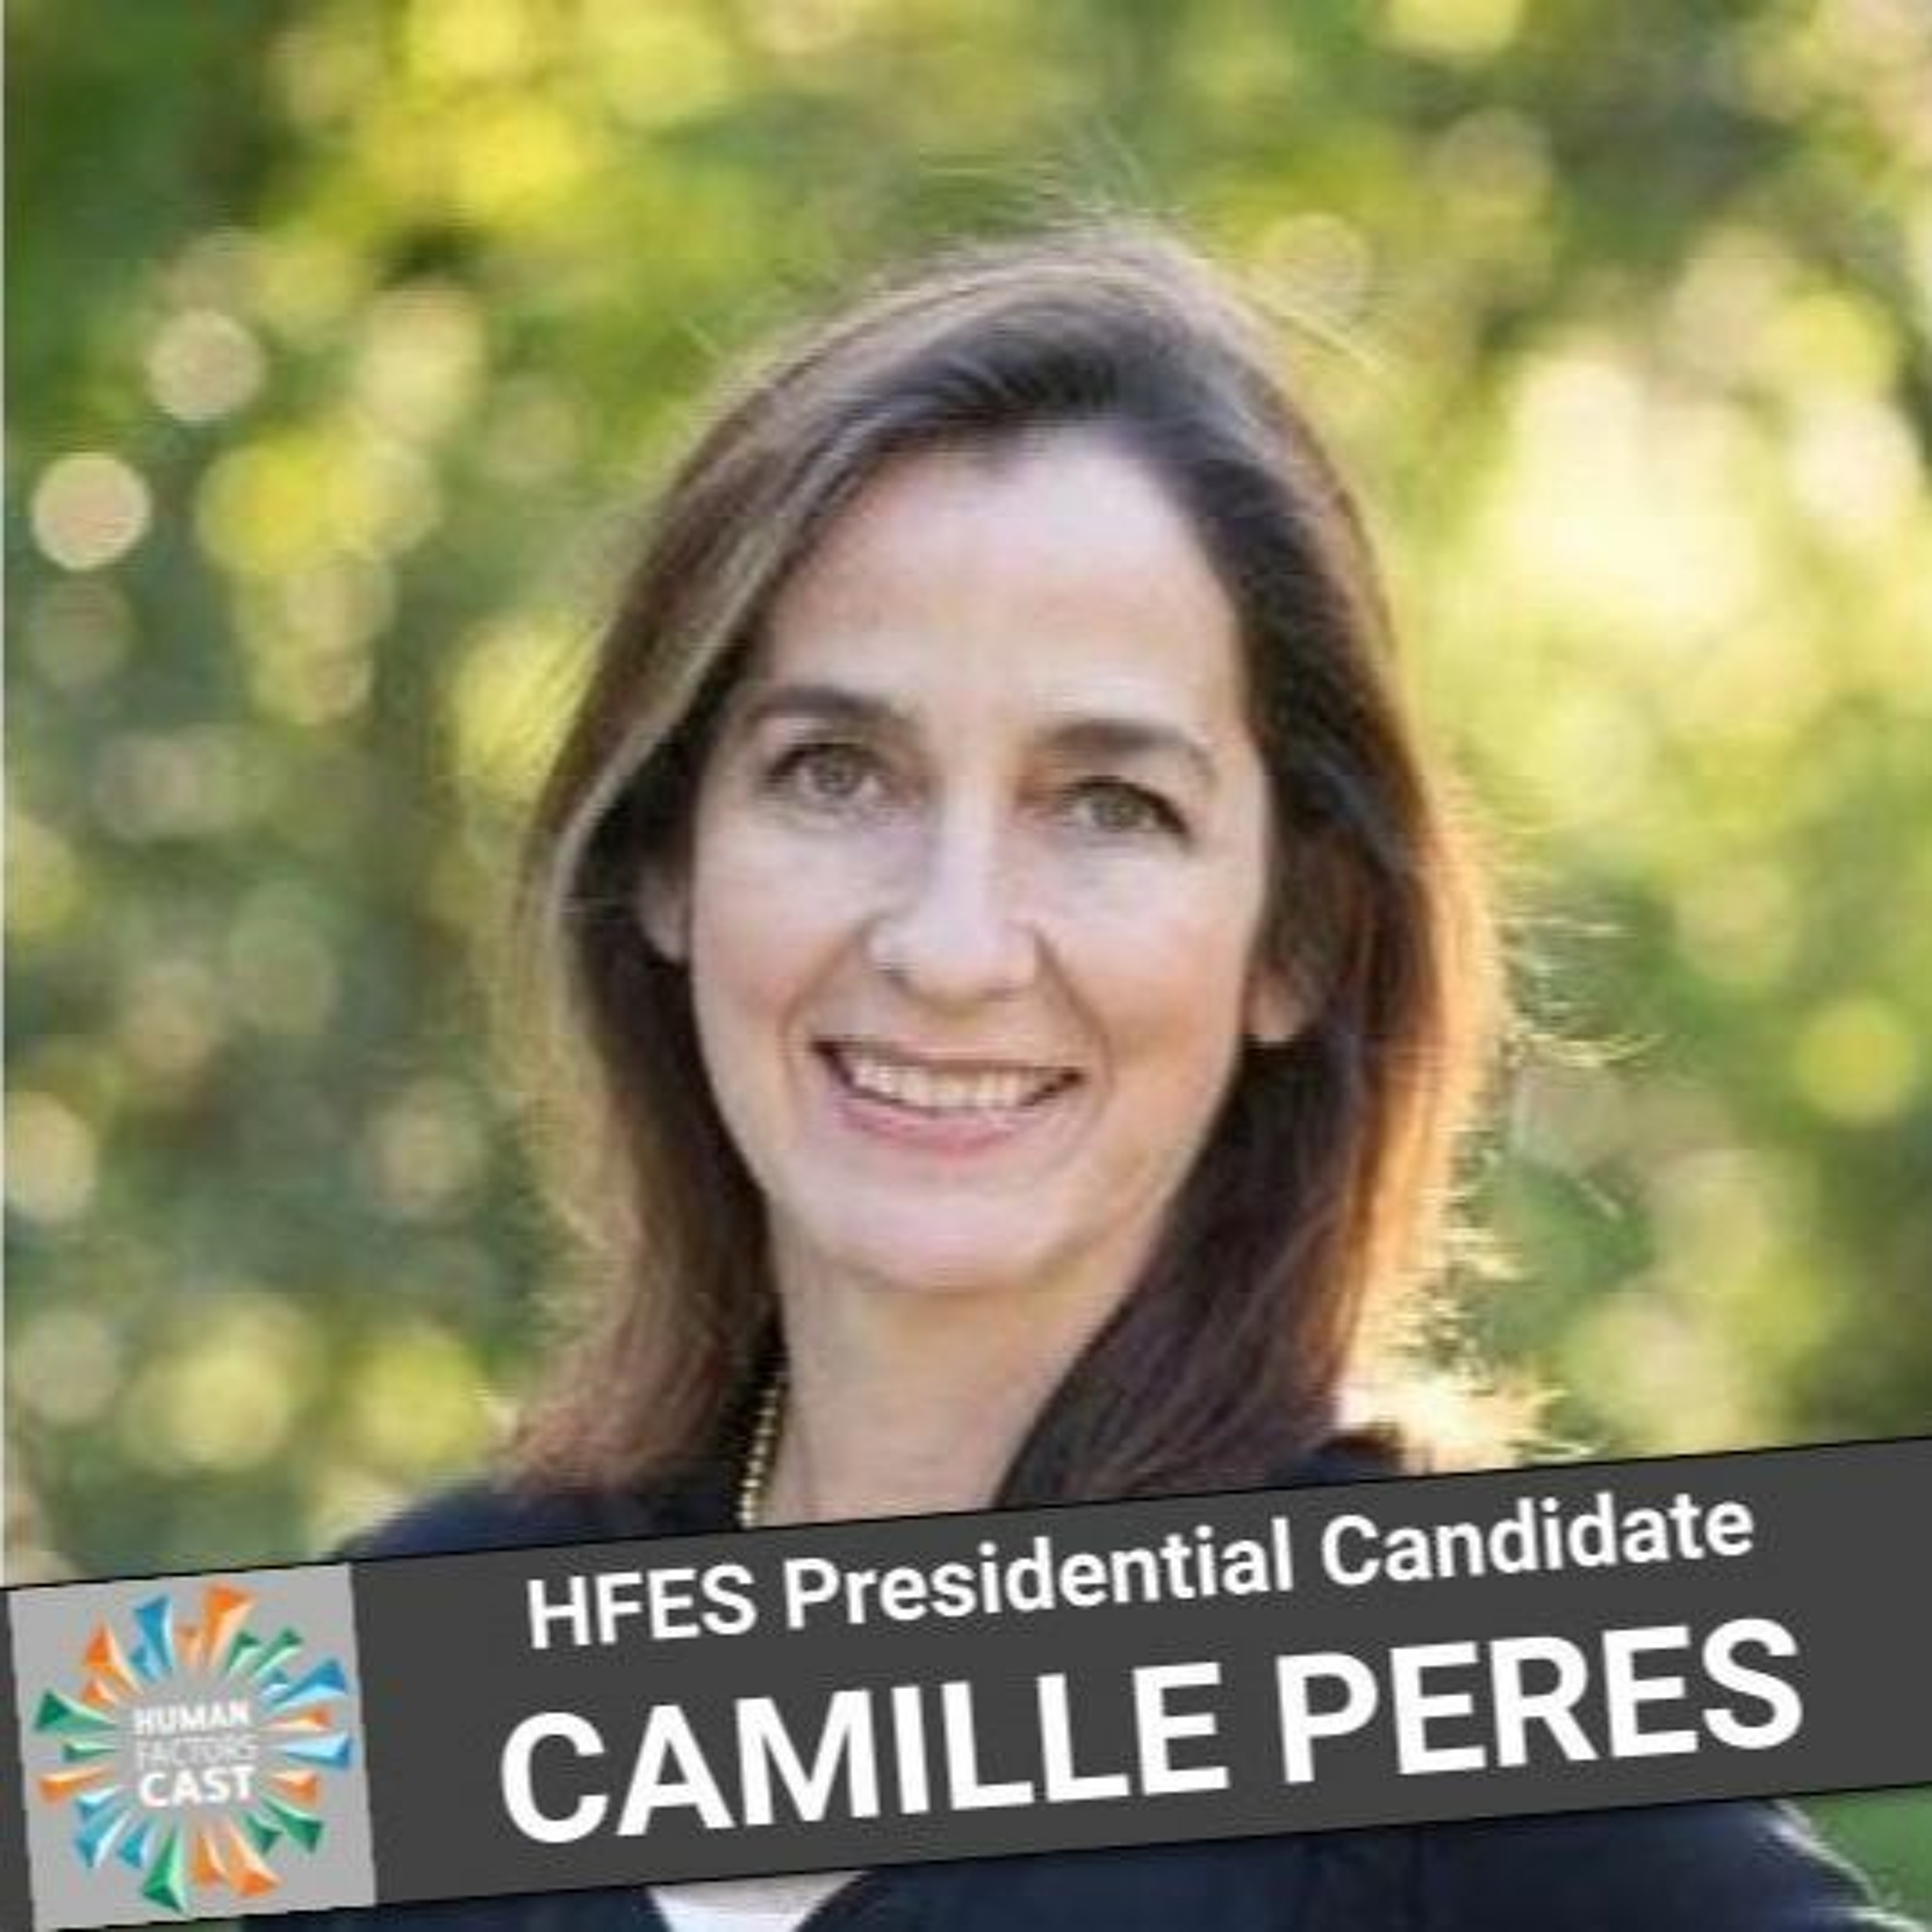 HFES Presidential Candidate Bonus Episode - Camille Peres